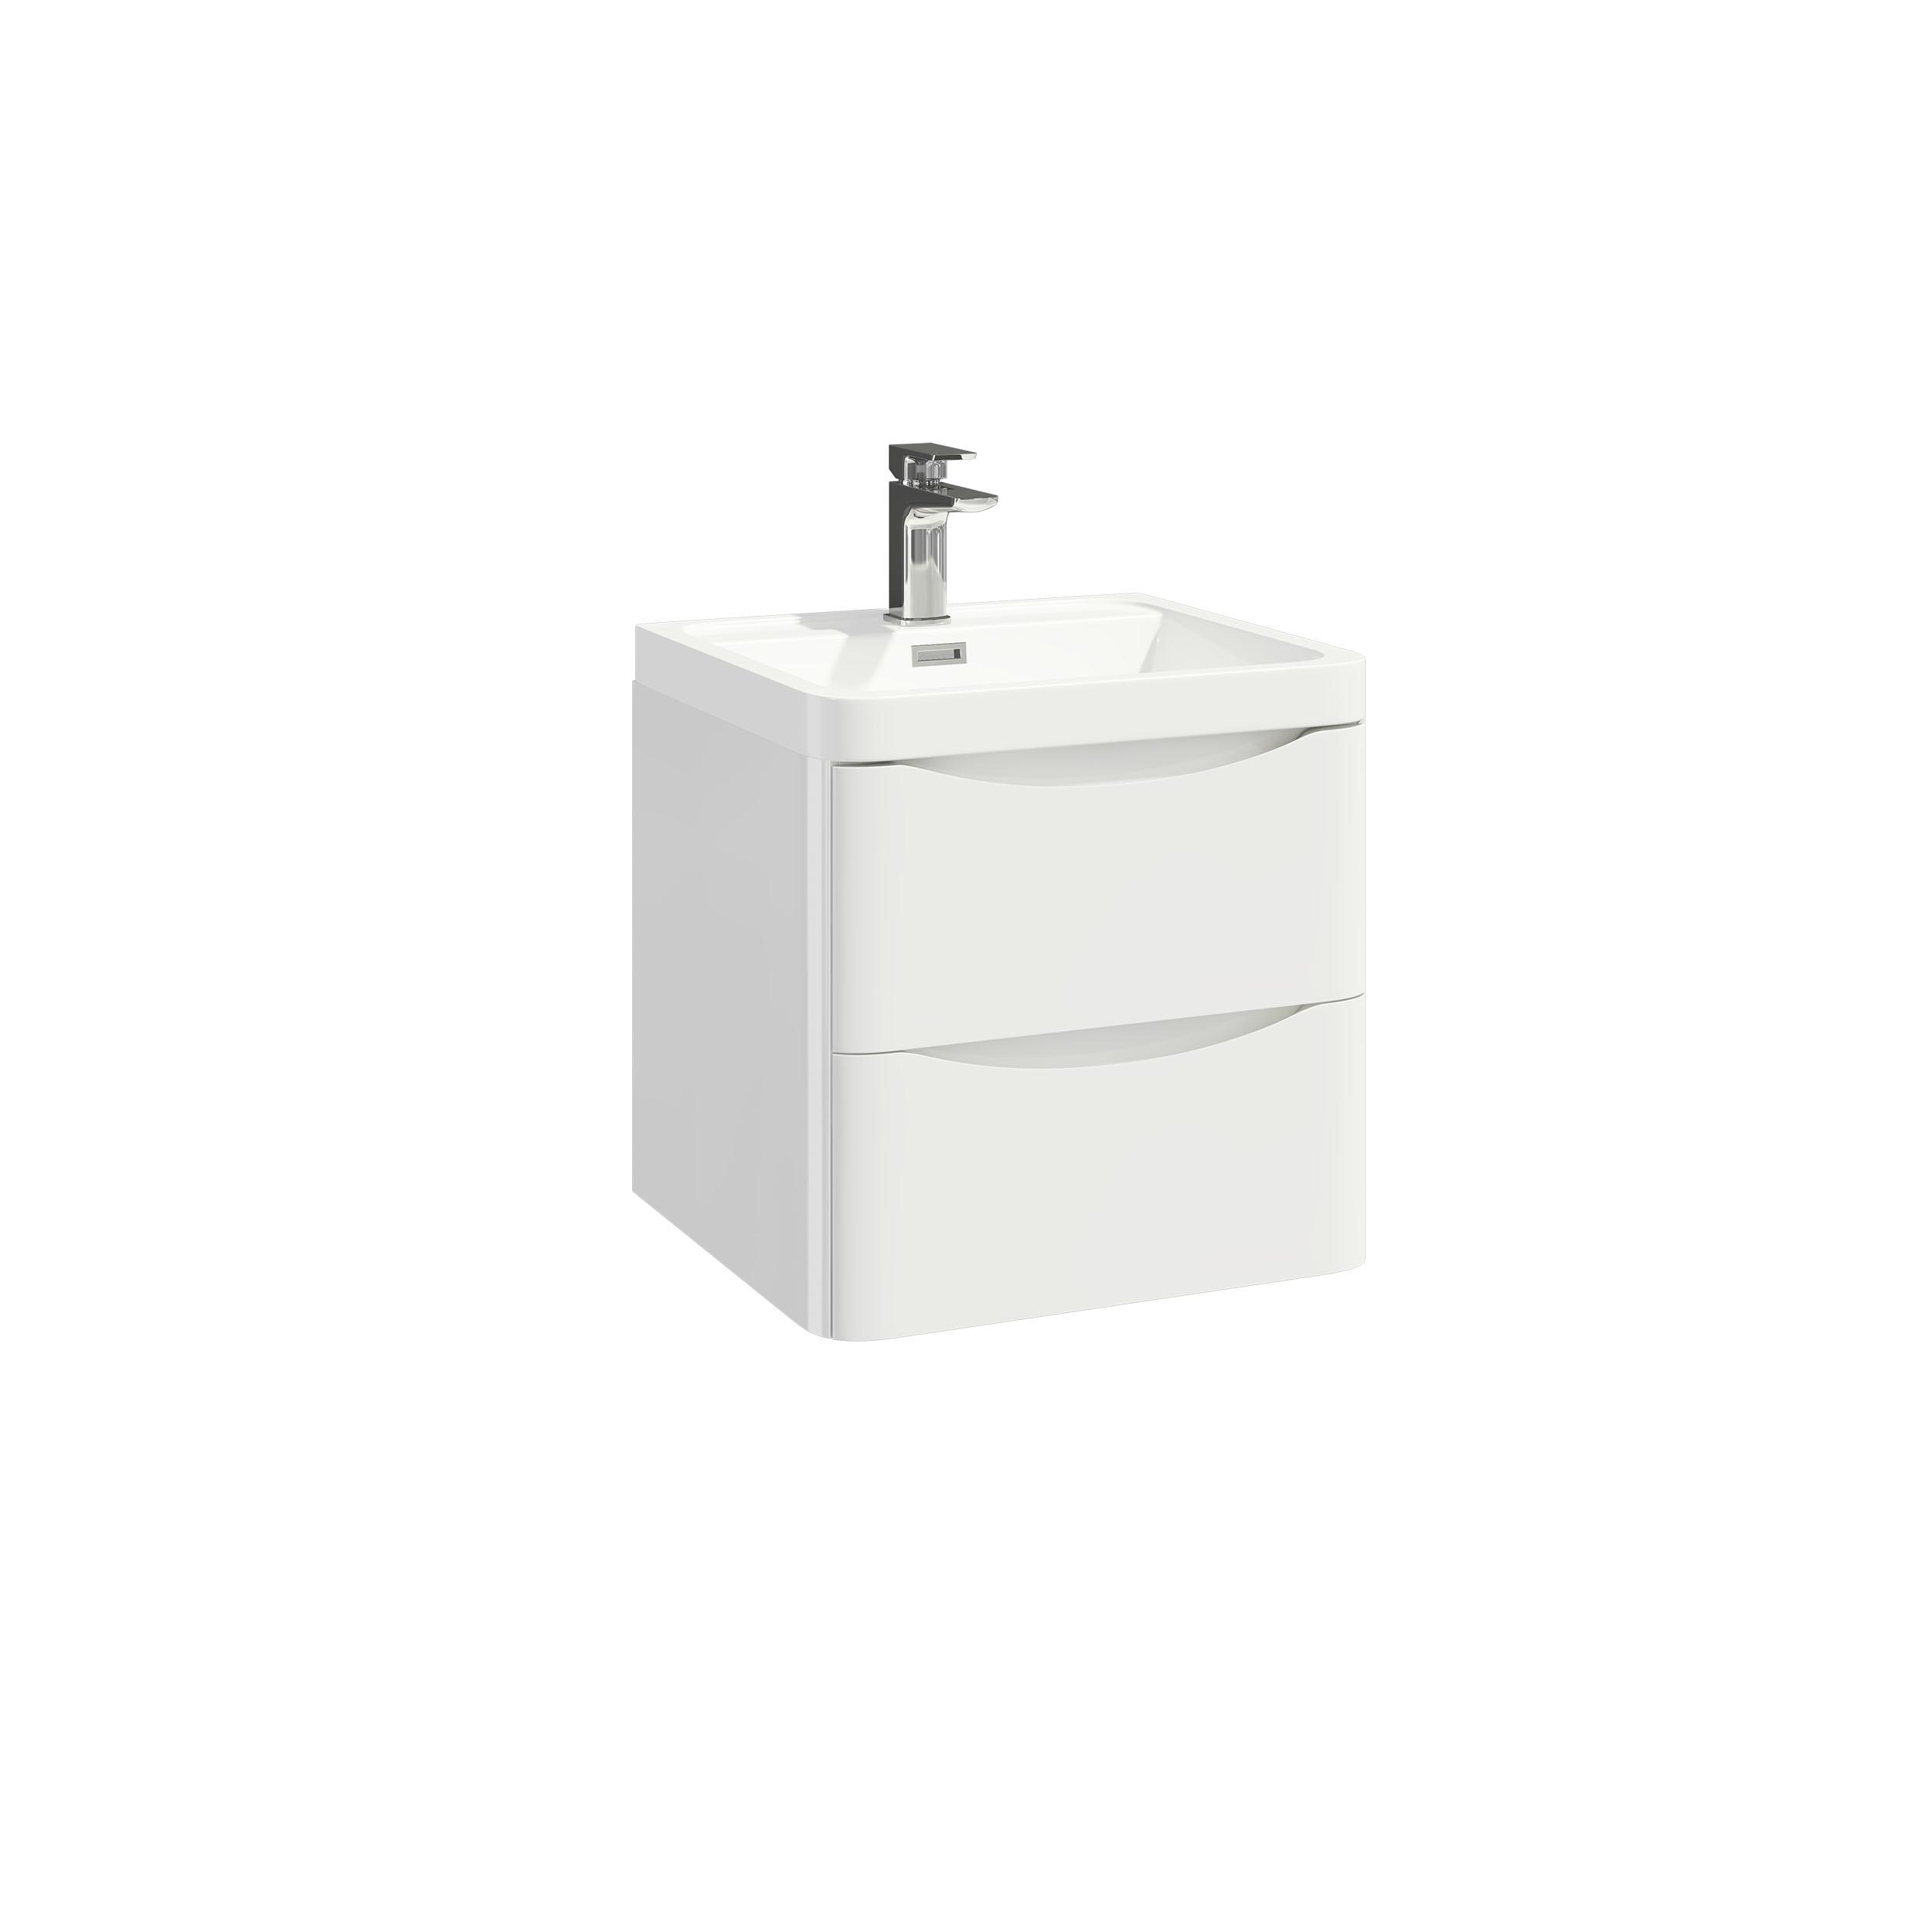 An image of Casa Bano Contour 500 Wall Cabinet With Basin Or Counter Top - High Gloss White